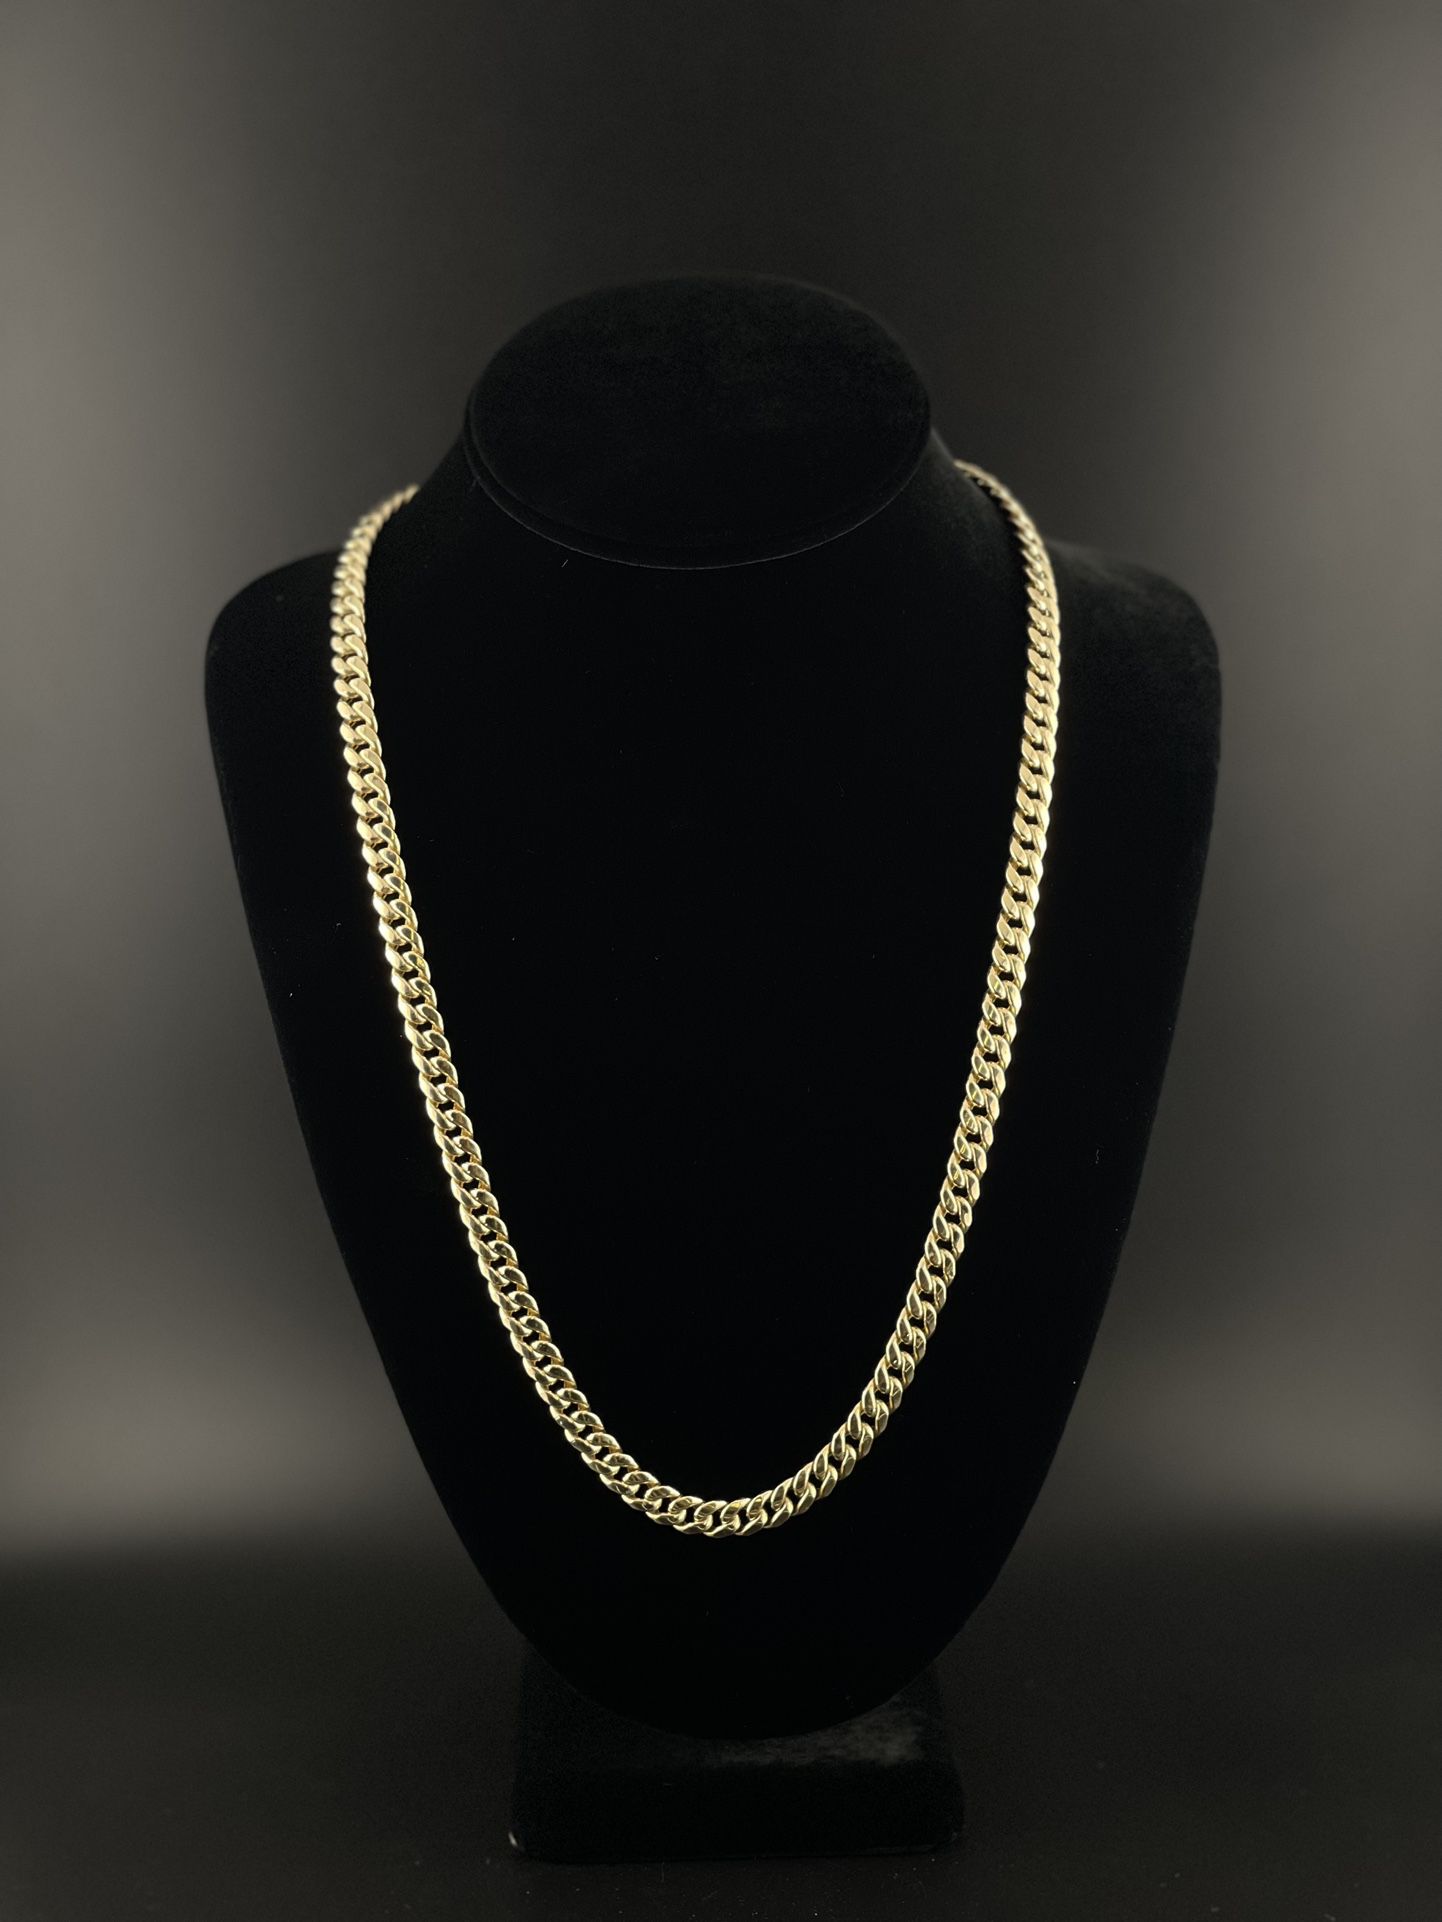 14Kt Gold Chain “Curb Link”